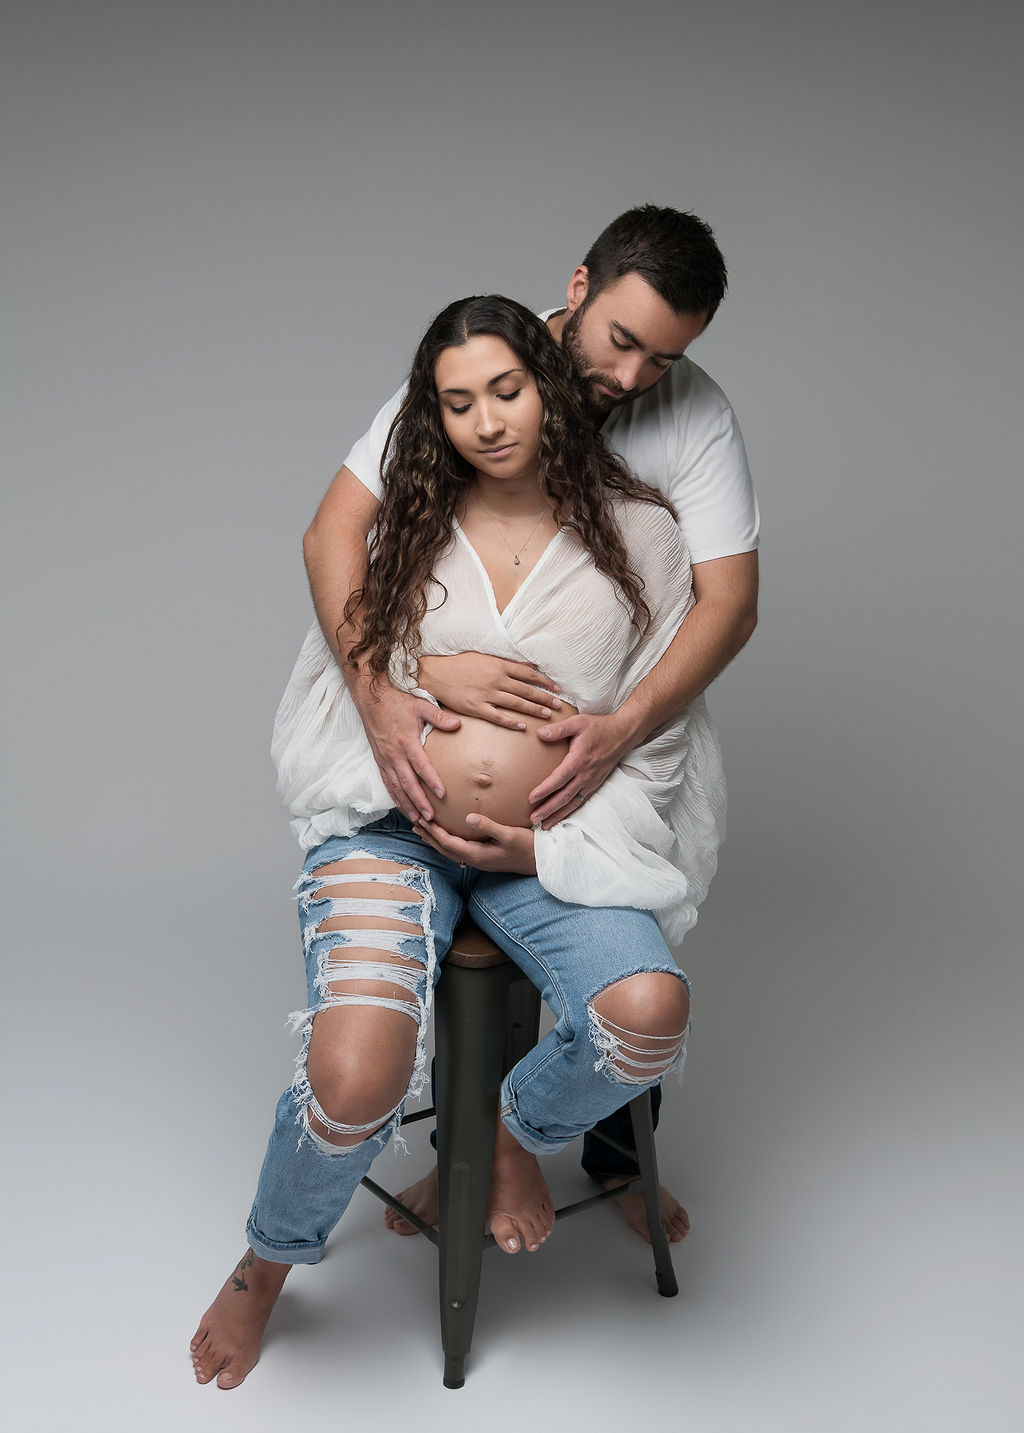 mom to be sitting on a stool with the father's hands on her belly